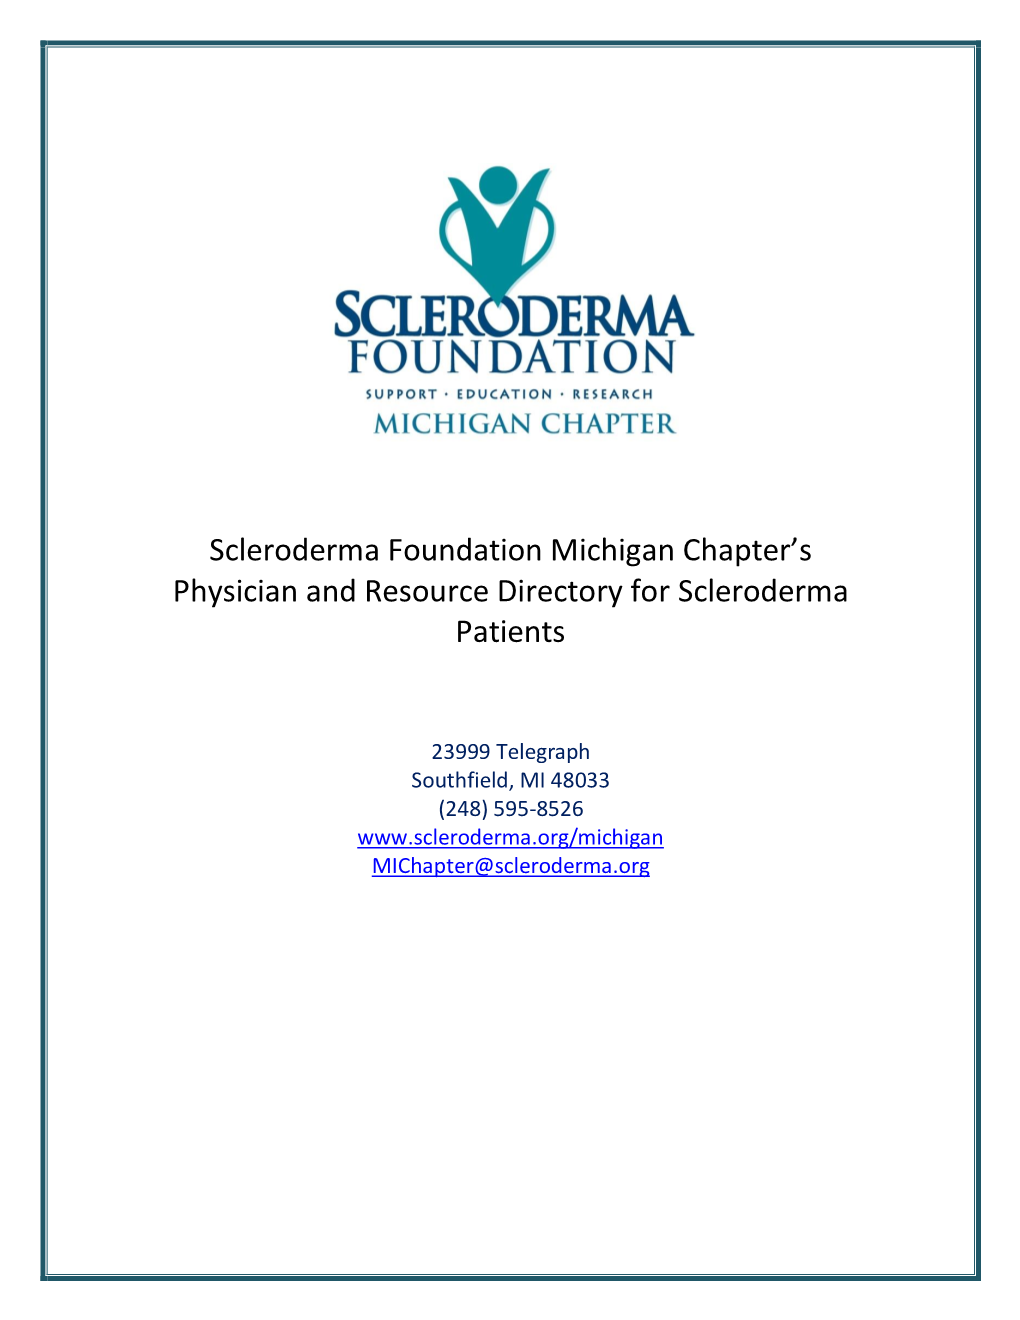 Physician Directory for Scleroderma Patients